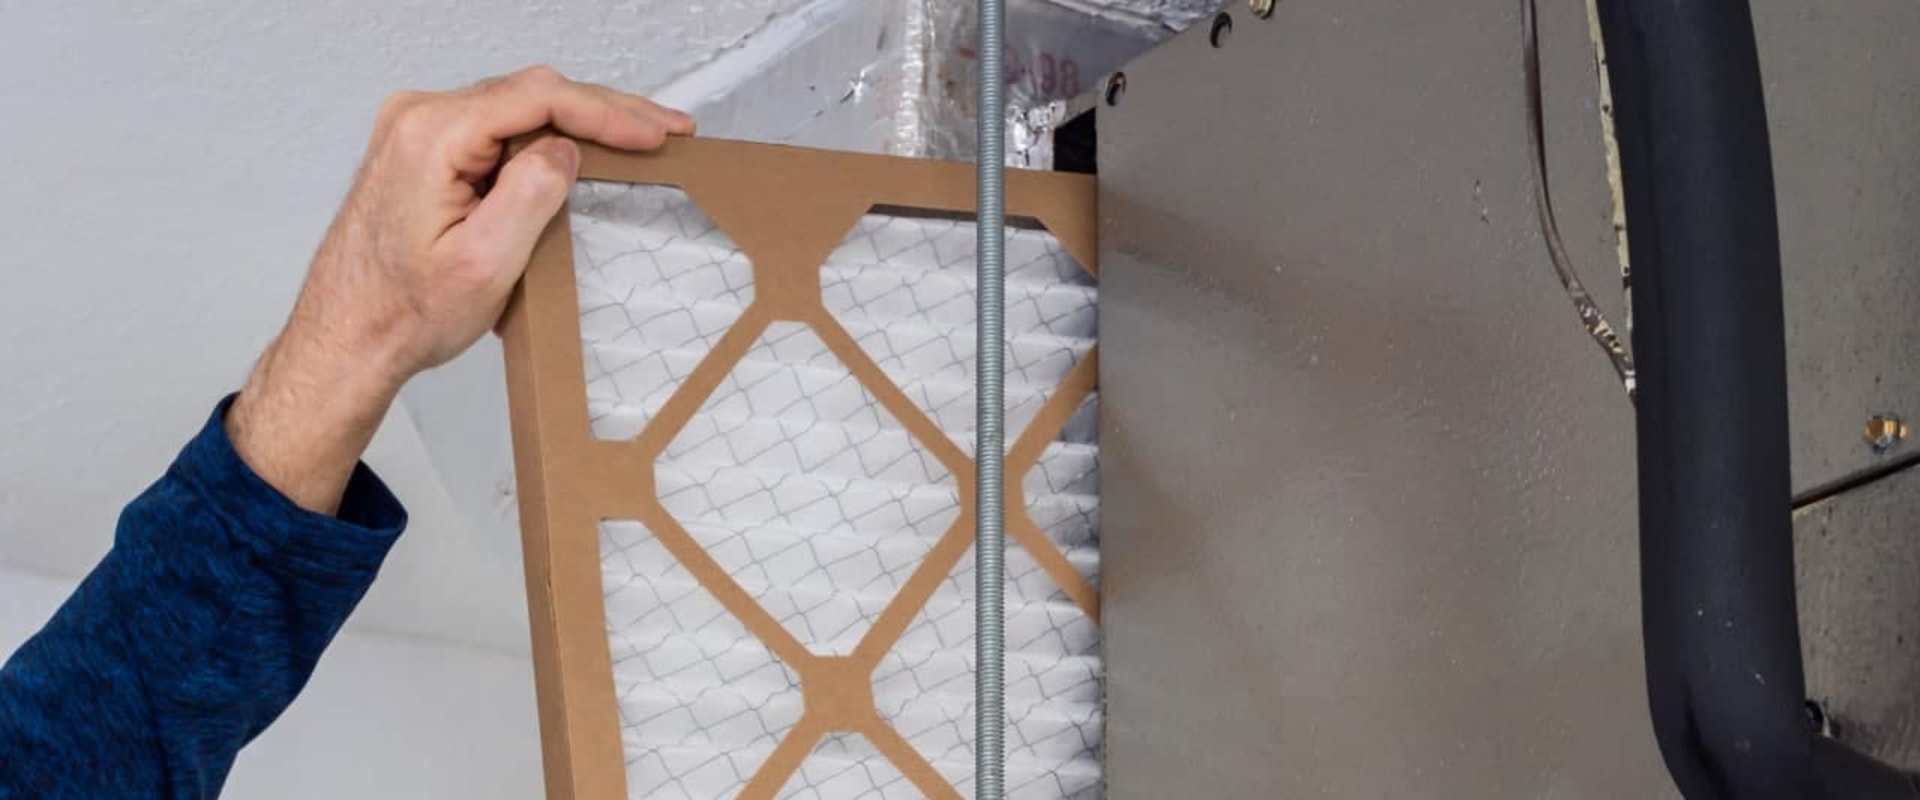 How long does an hvac filter last?